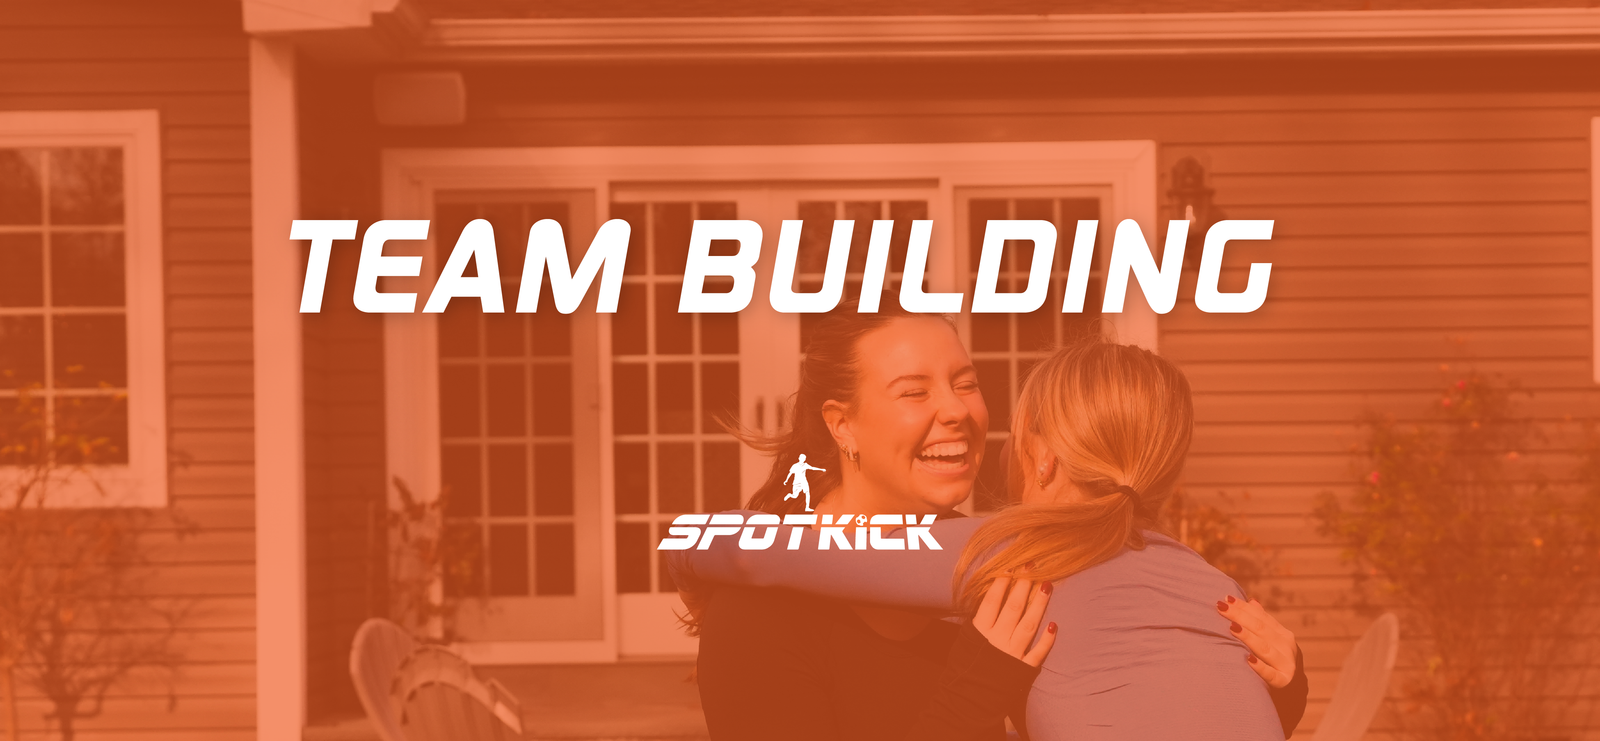 team building with spotkick, soccer team building